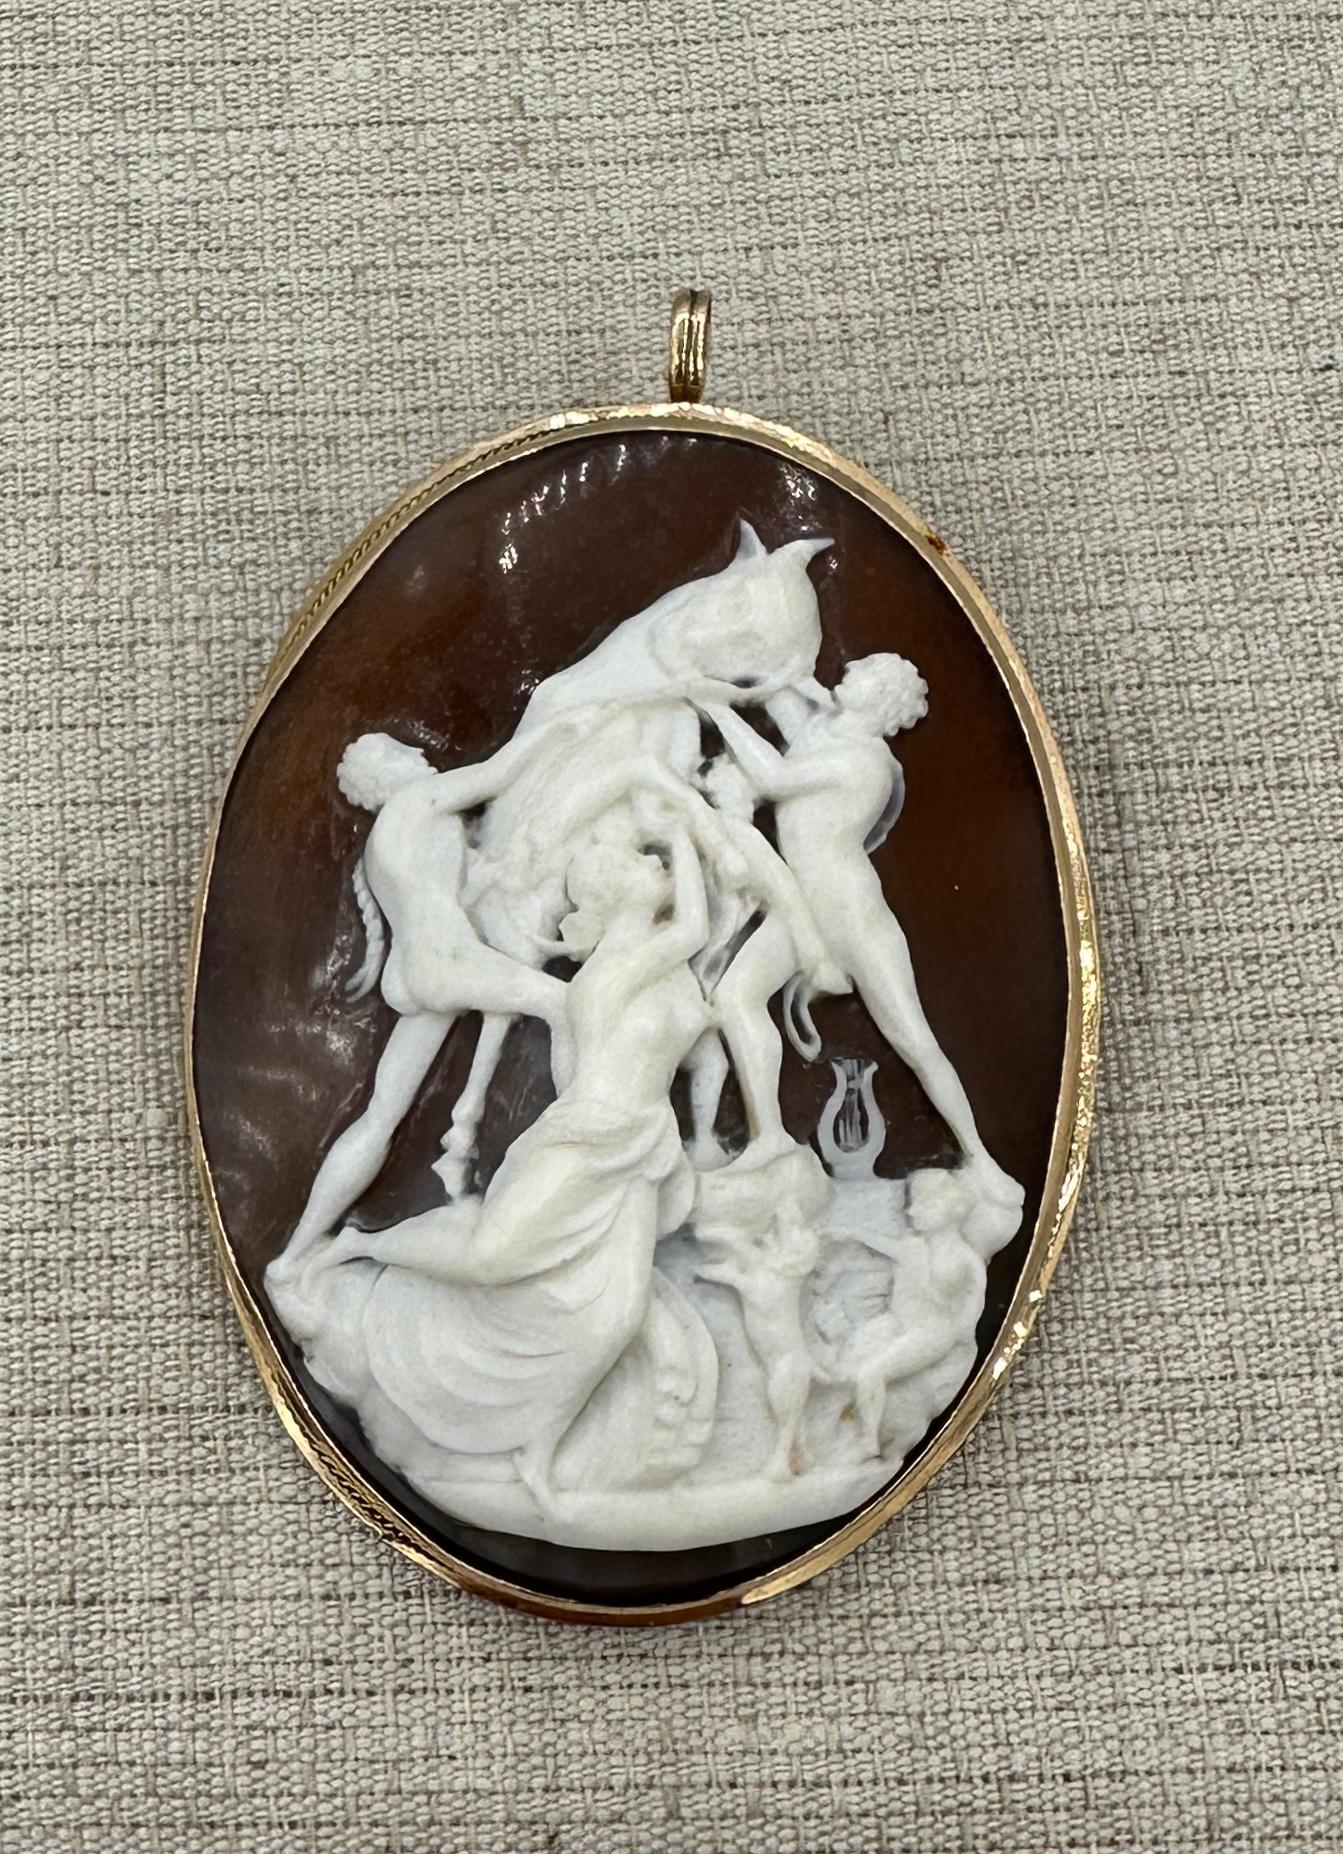 Taurus Bull Europa Goddess Zeus Dog Cameo Pendant Brooch Necklace Gold Antique In Excellent Condition For Sale In New York, NY